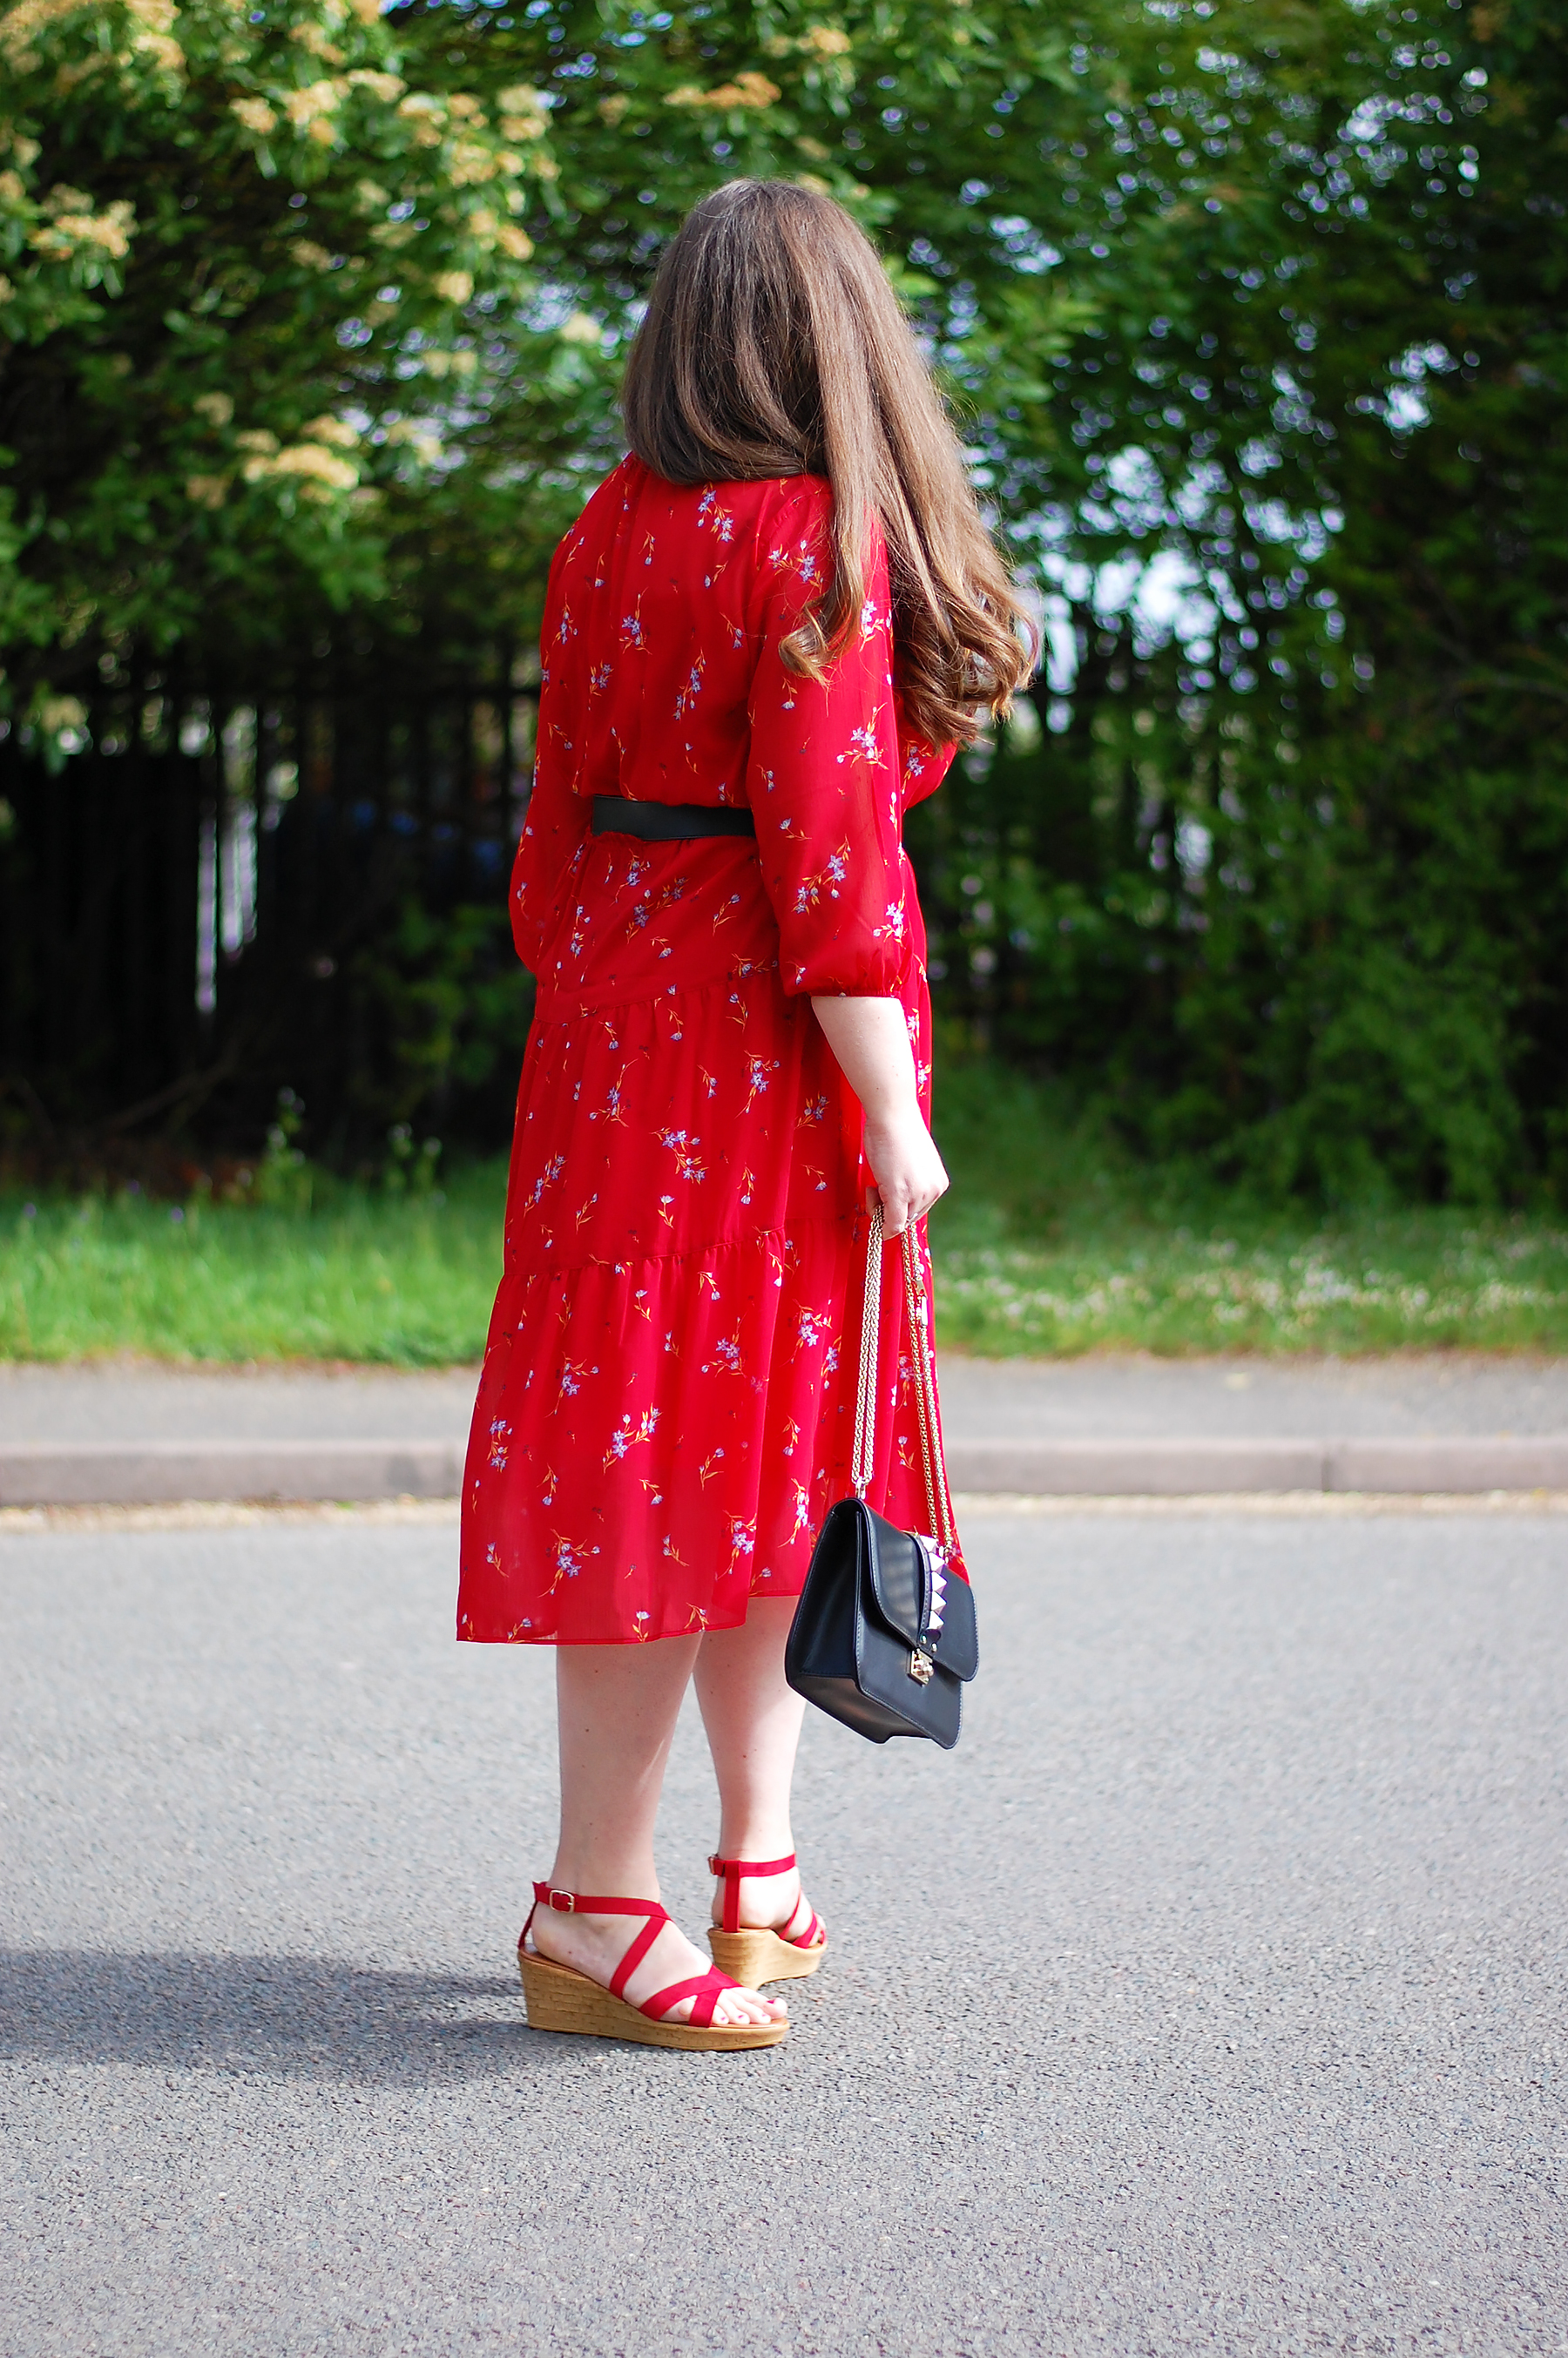 Red Dress and Sandals Outfit